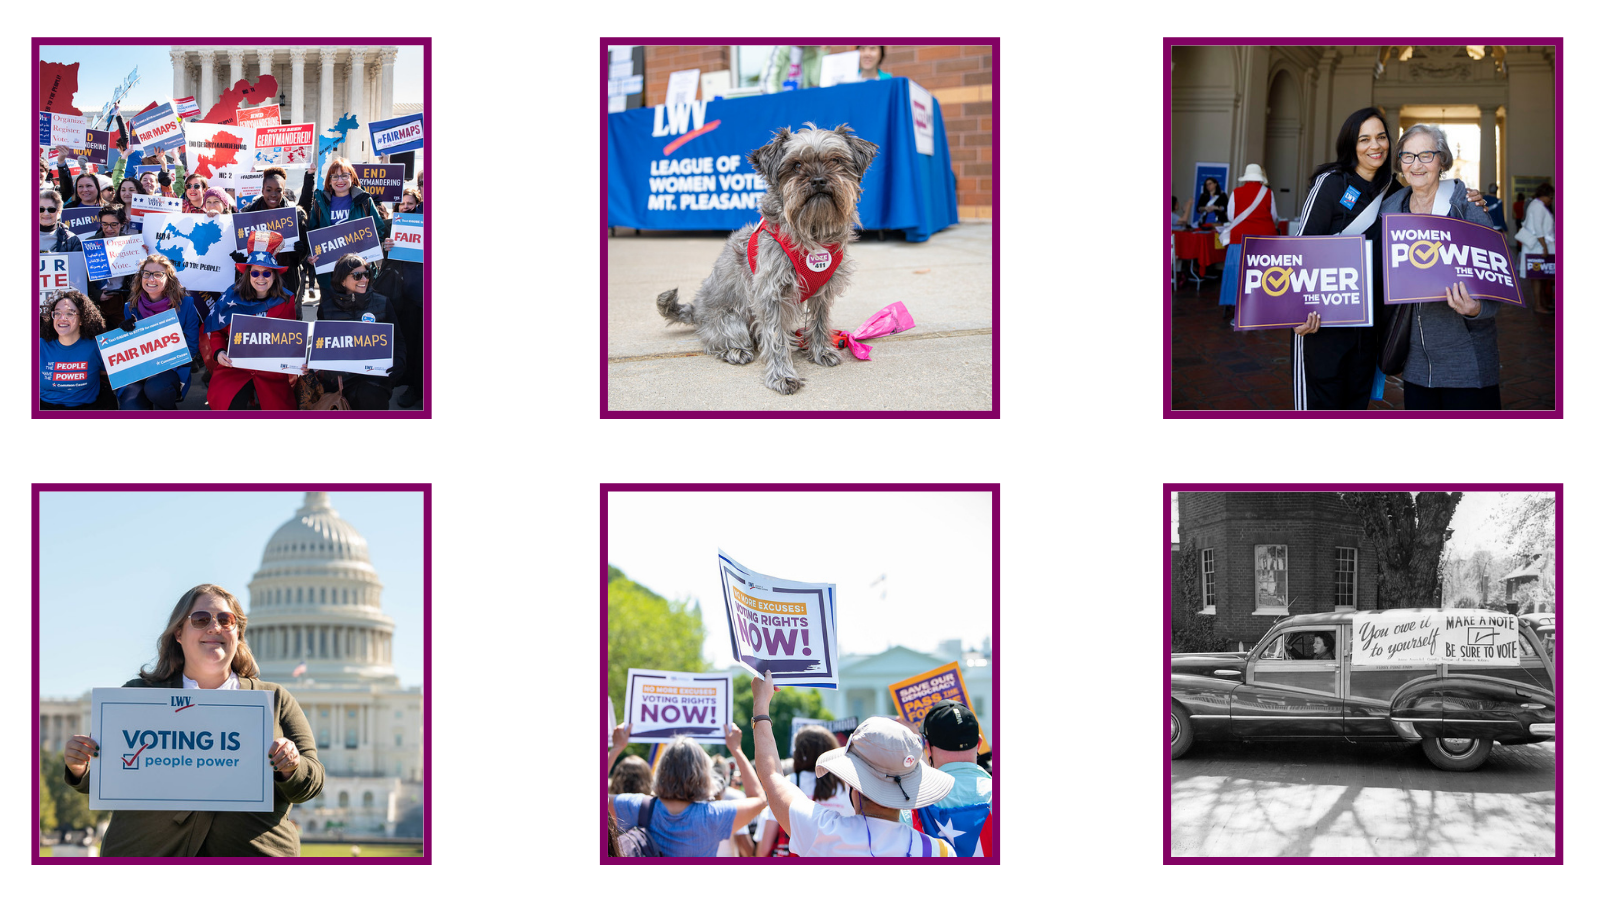 Collage of images from LWVUS flickr site